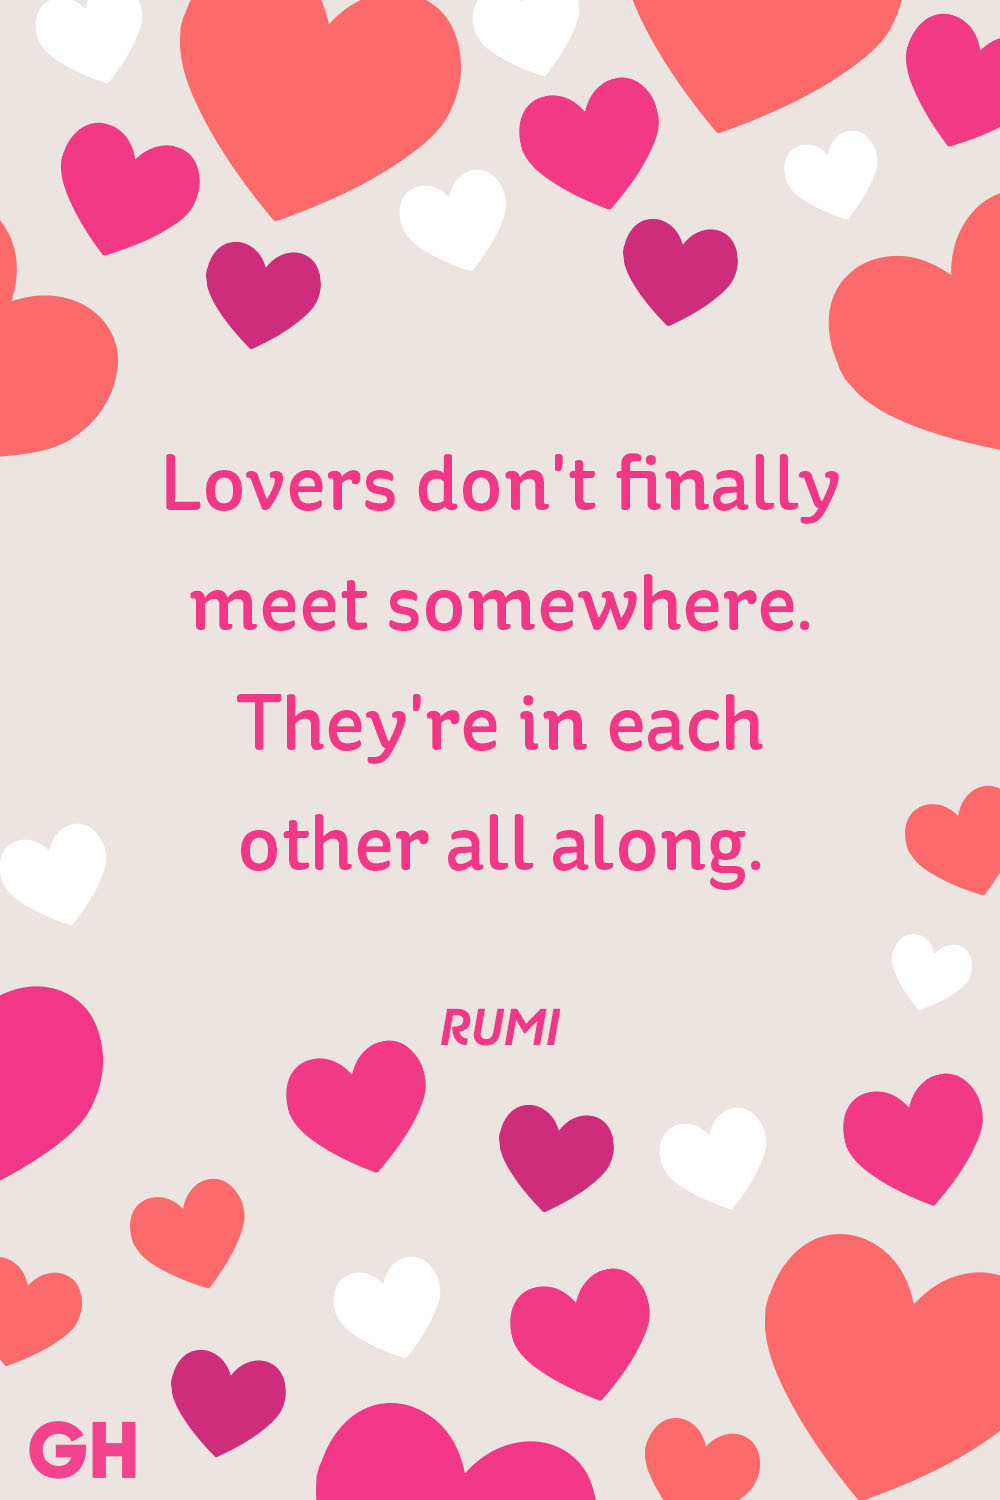 Quotes About Valentines Day
 30 Cute Valentine s Day Quotes Best Romantic Quotes